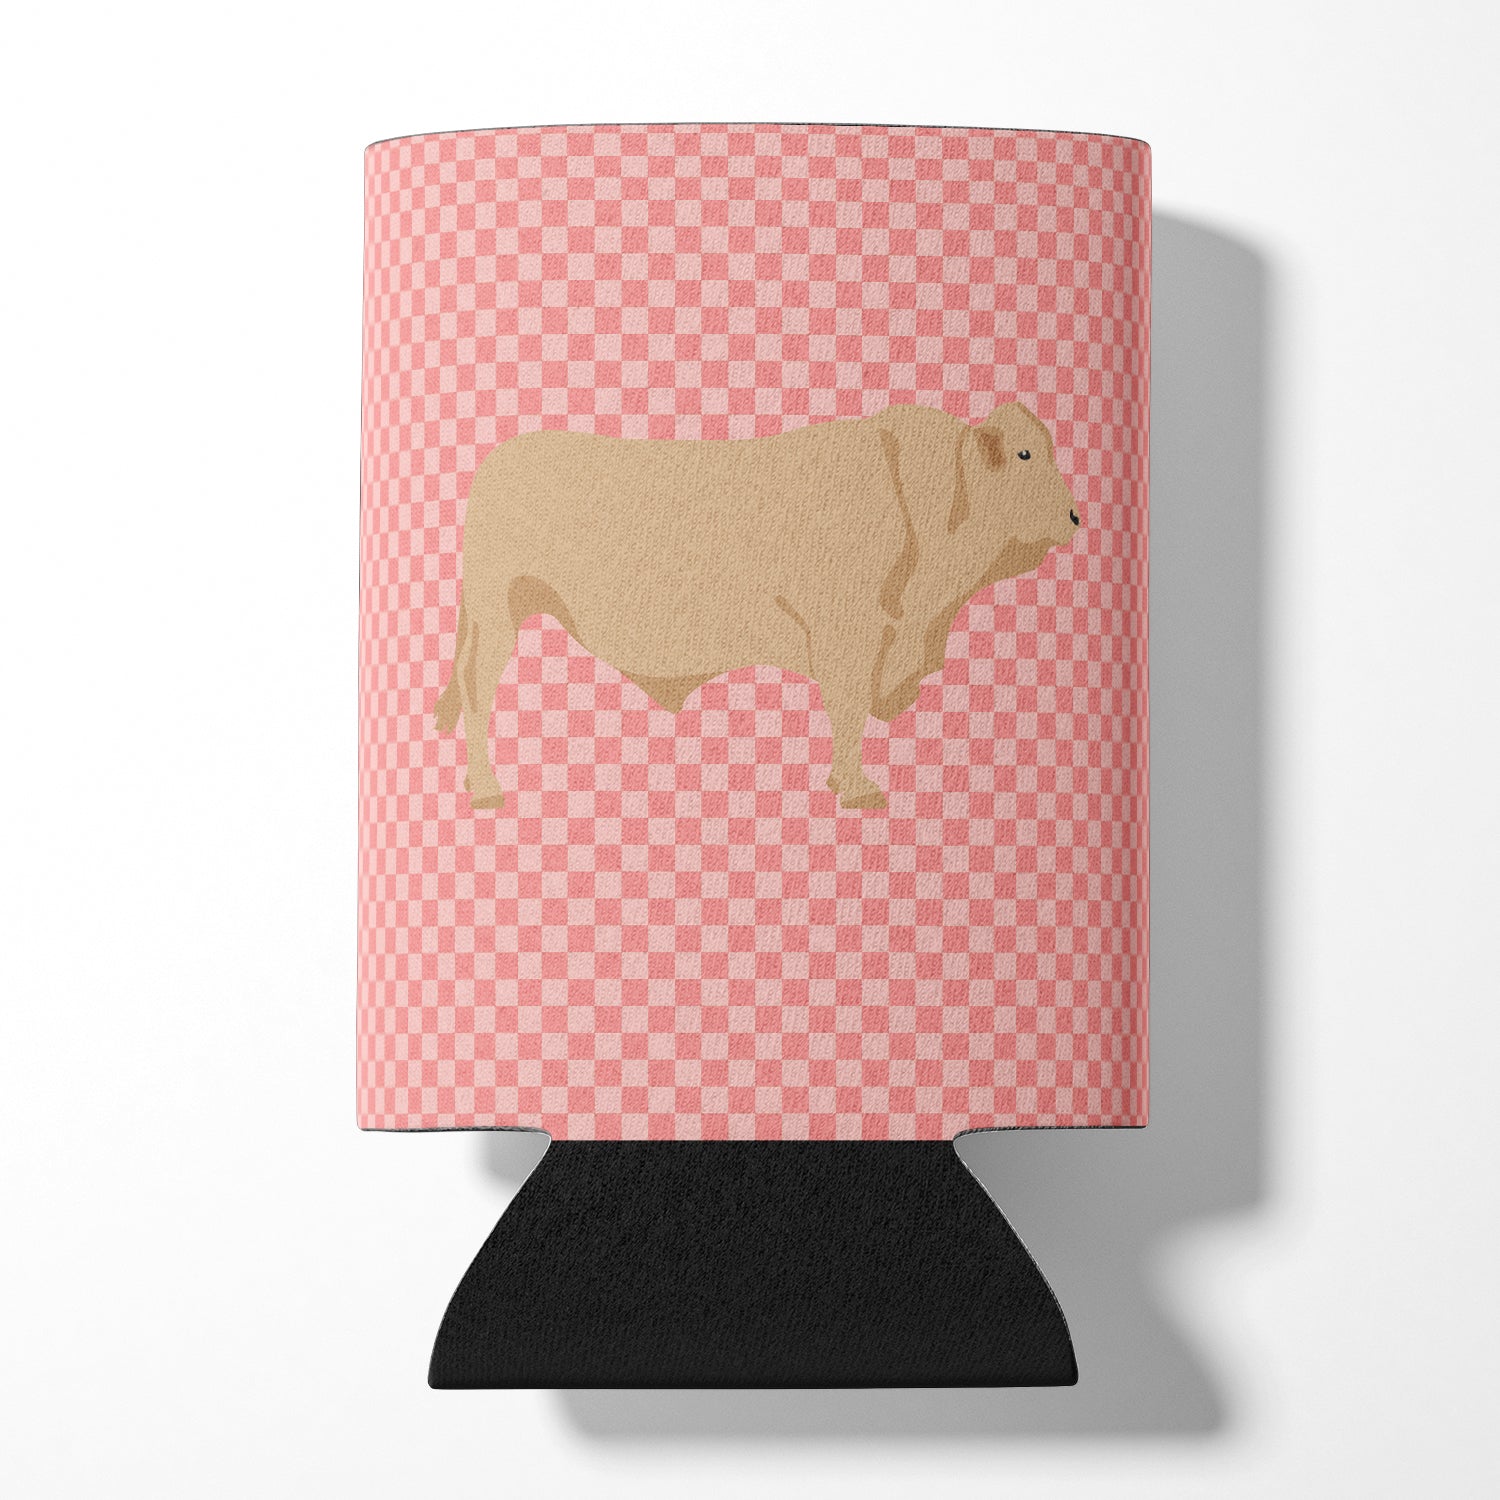 Charolais Cow Pink Check Can or Bottle Hugger BB7826CC  the-store.com.